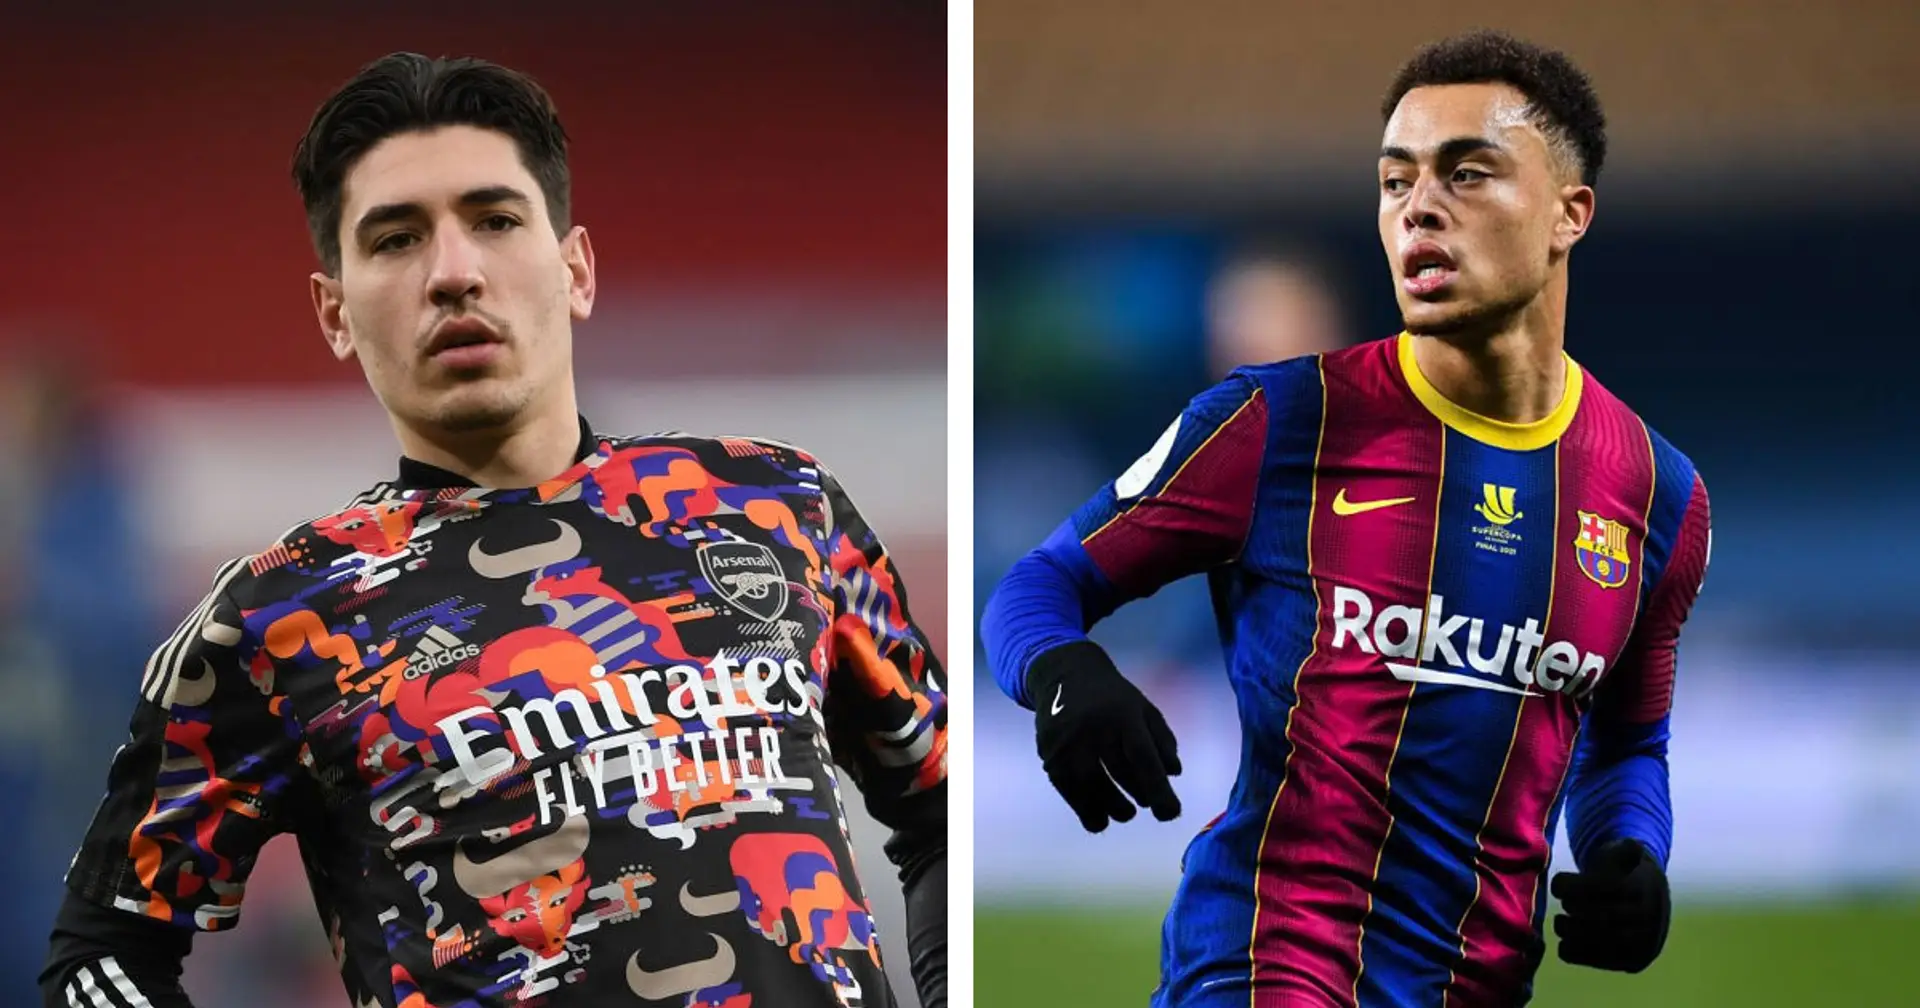 Hector Bellerin could leave Arsenal this summer after failed move to Barca last year: ESPN (reliability: 4 stars)